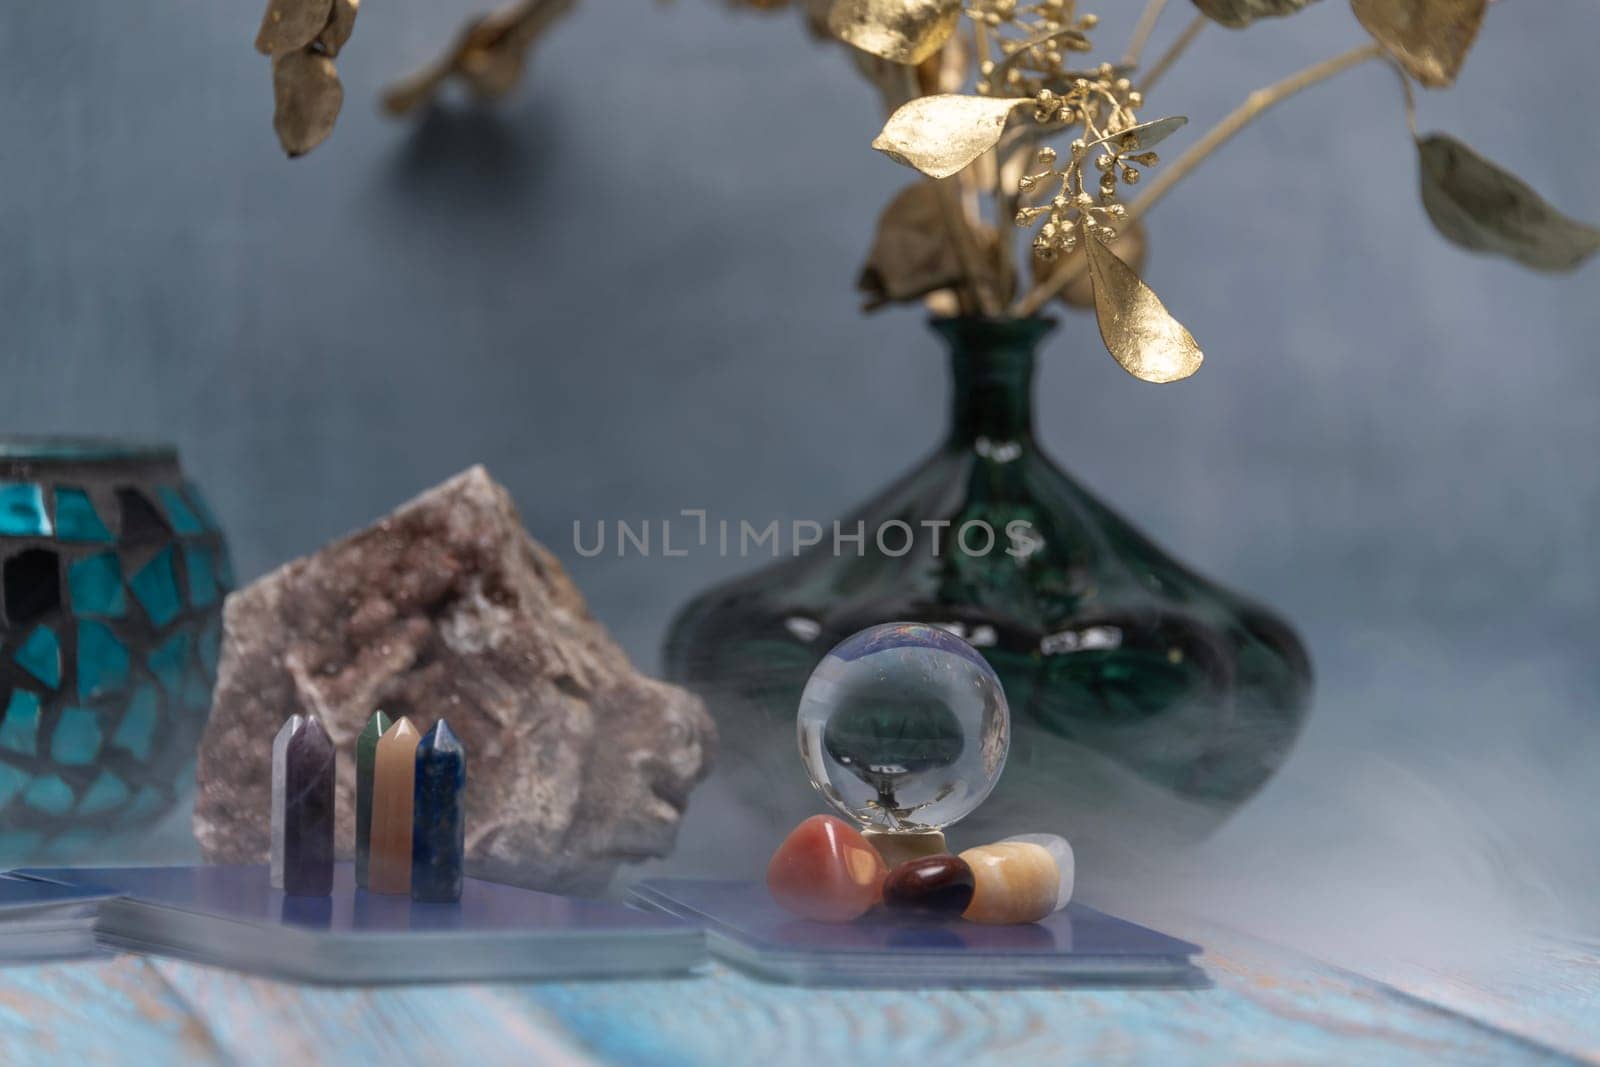 A serene tarot card reading space with assorted healing crystals, a candle lantern, and a geode on a weathered wooden surface. by jbruiz78